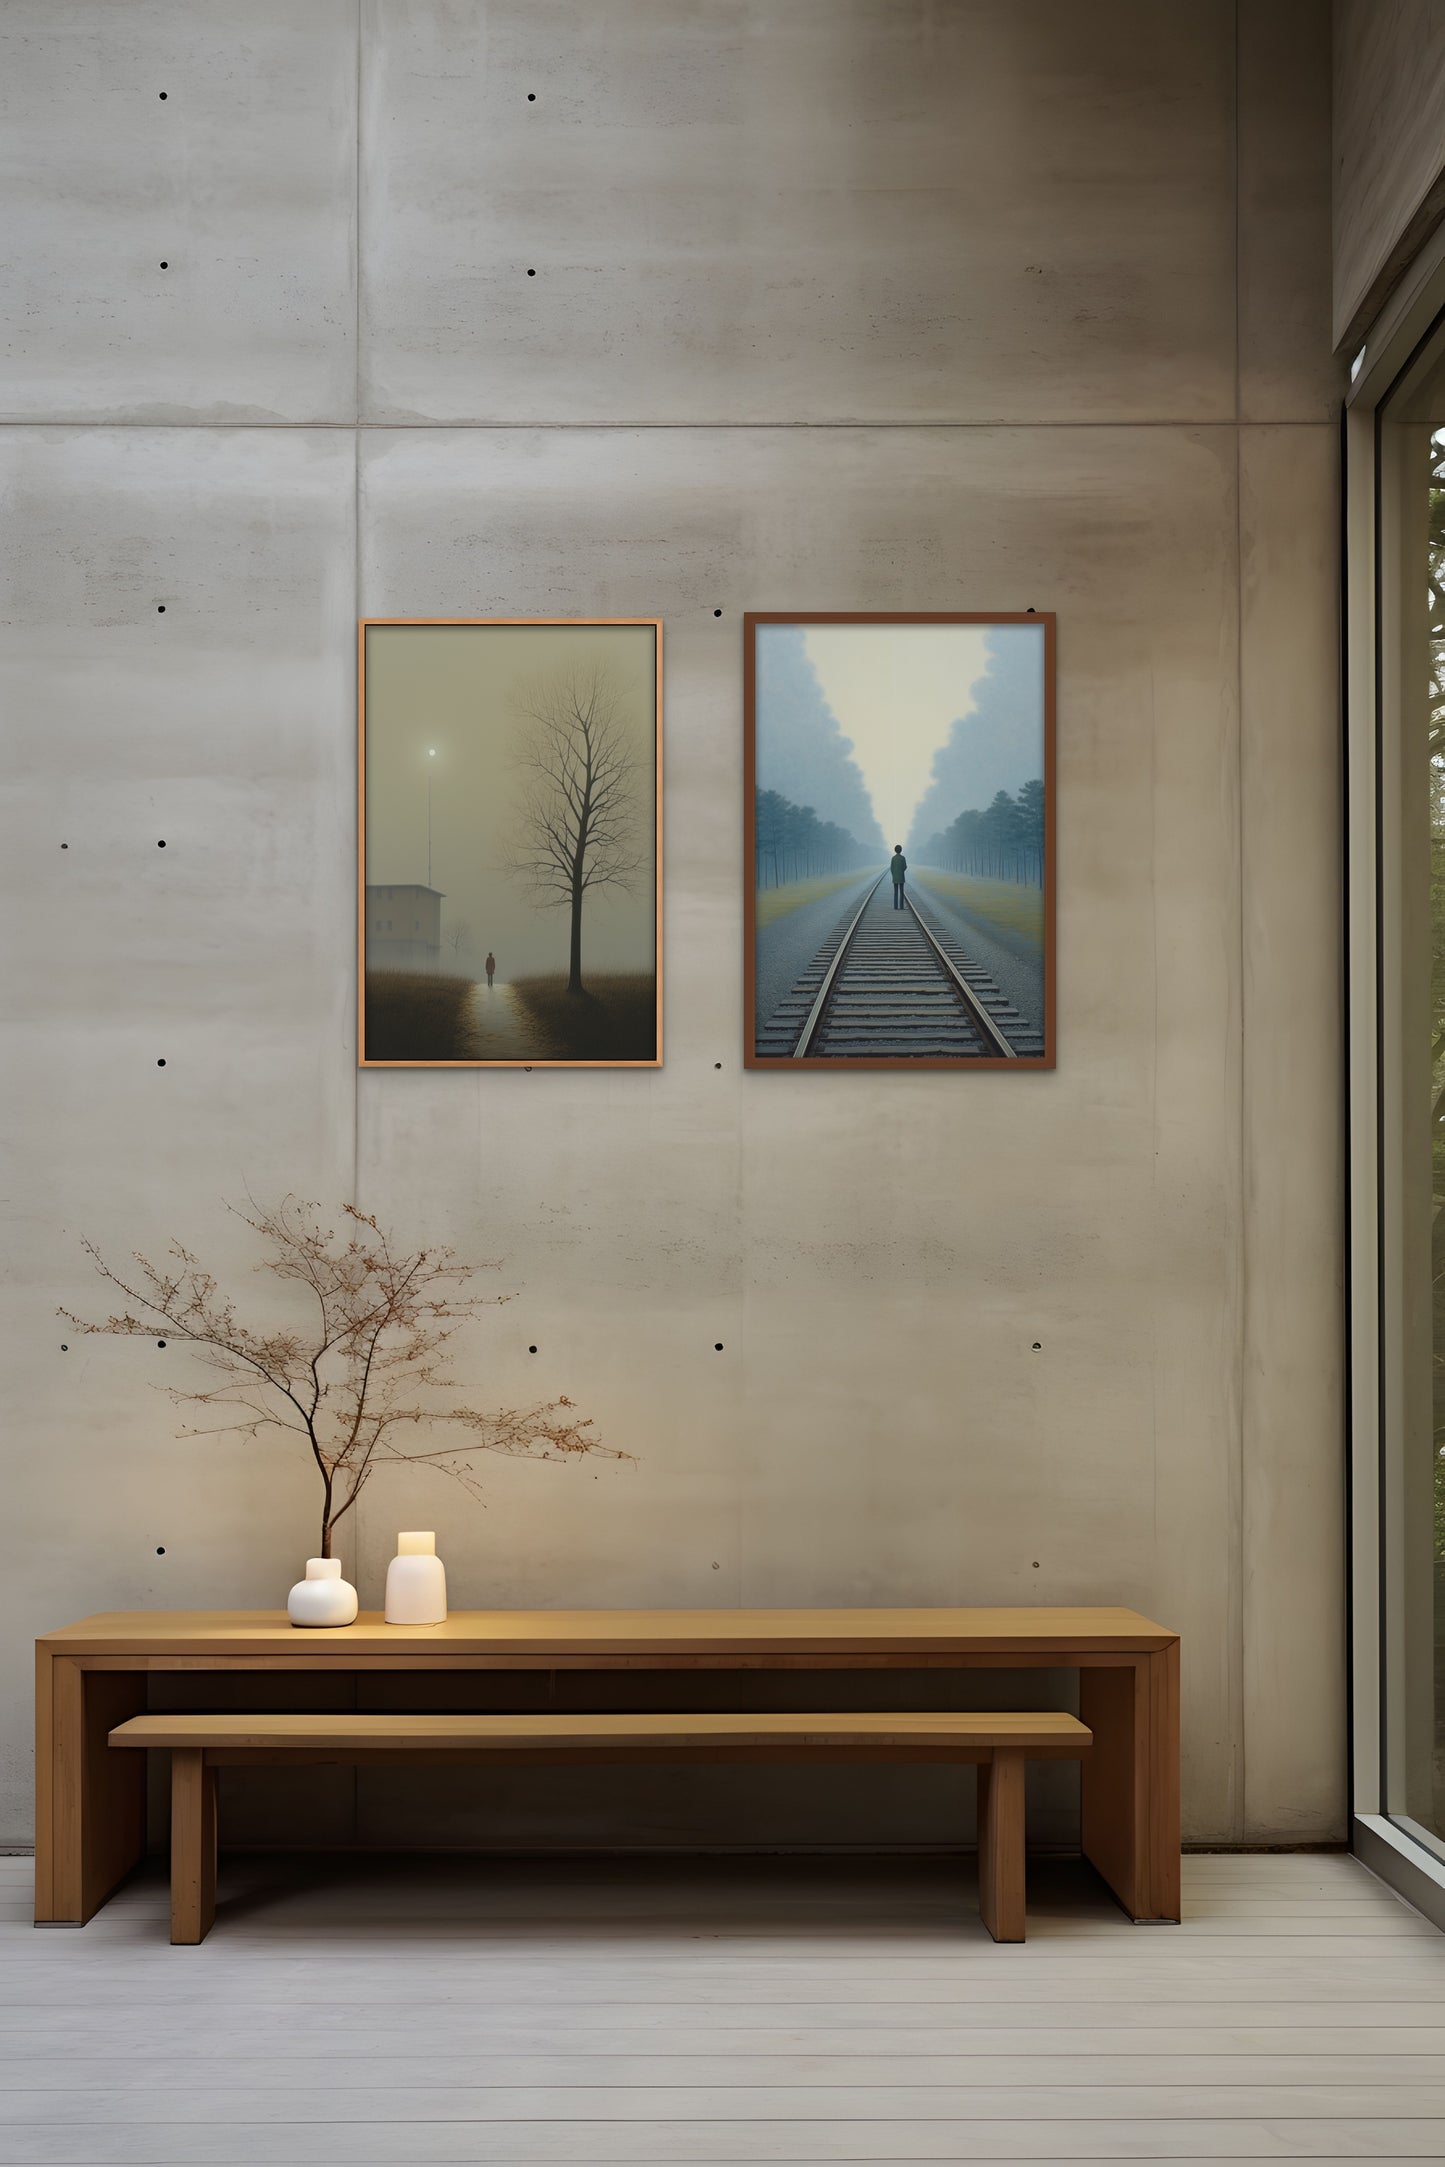 A minimalist interior with two framed paintings above a wooden bench and a small tree with a vase.